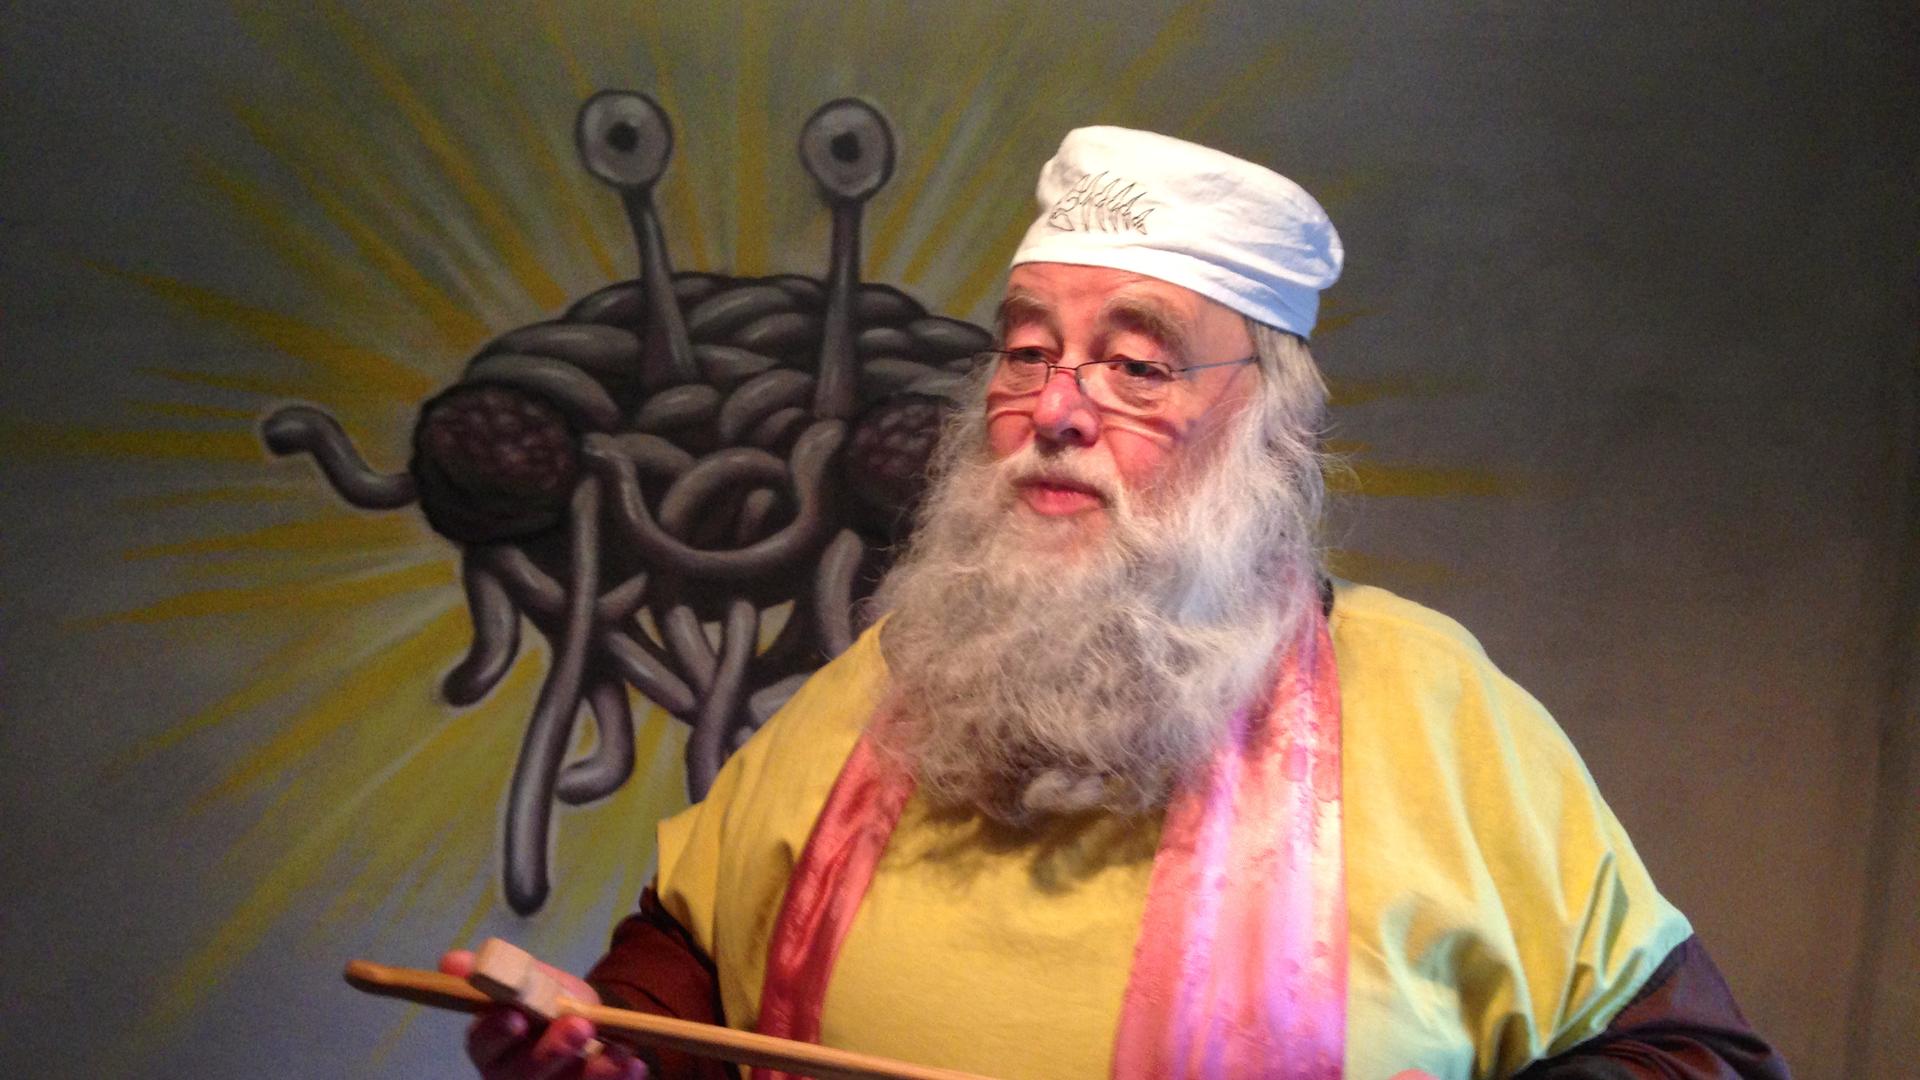 Rüdiger Weida, aka “Bruder Spaghettus”, founded a church dedicated to the worship of “the Flying Spaghetti Monster” in Templin, Germany. 